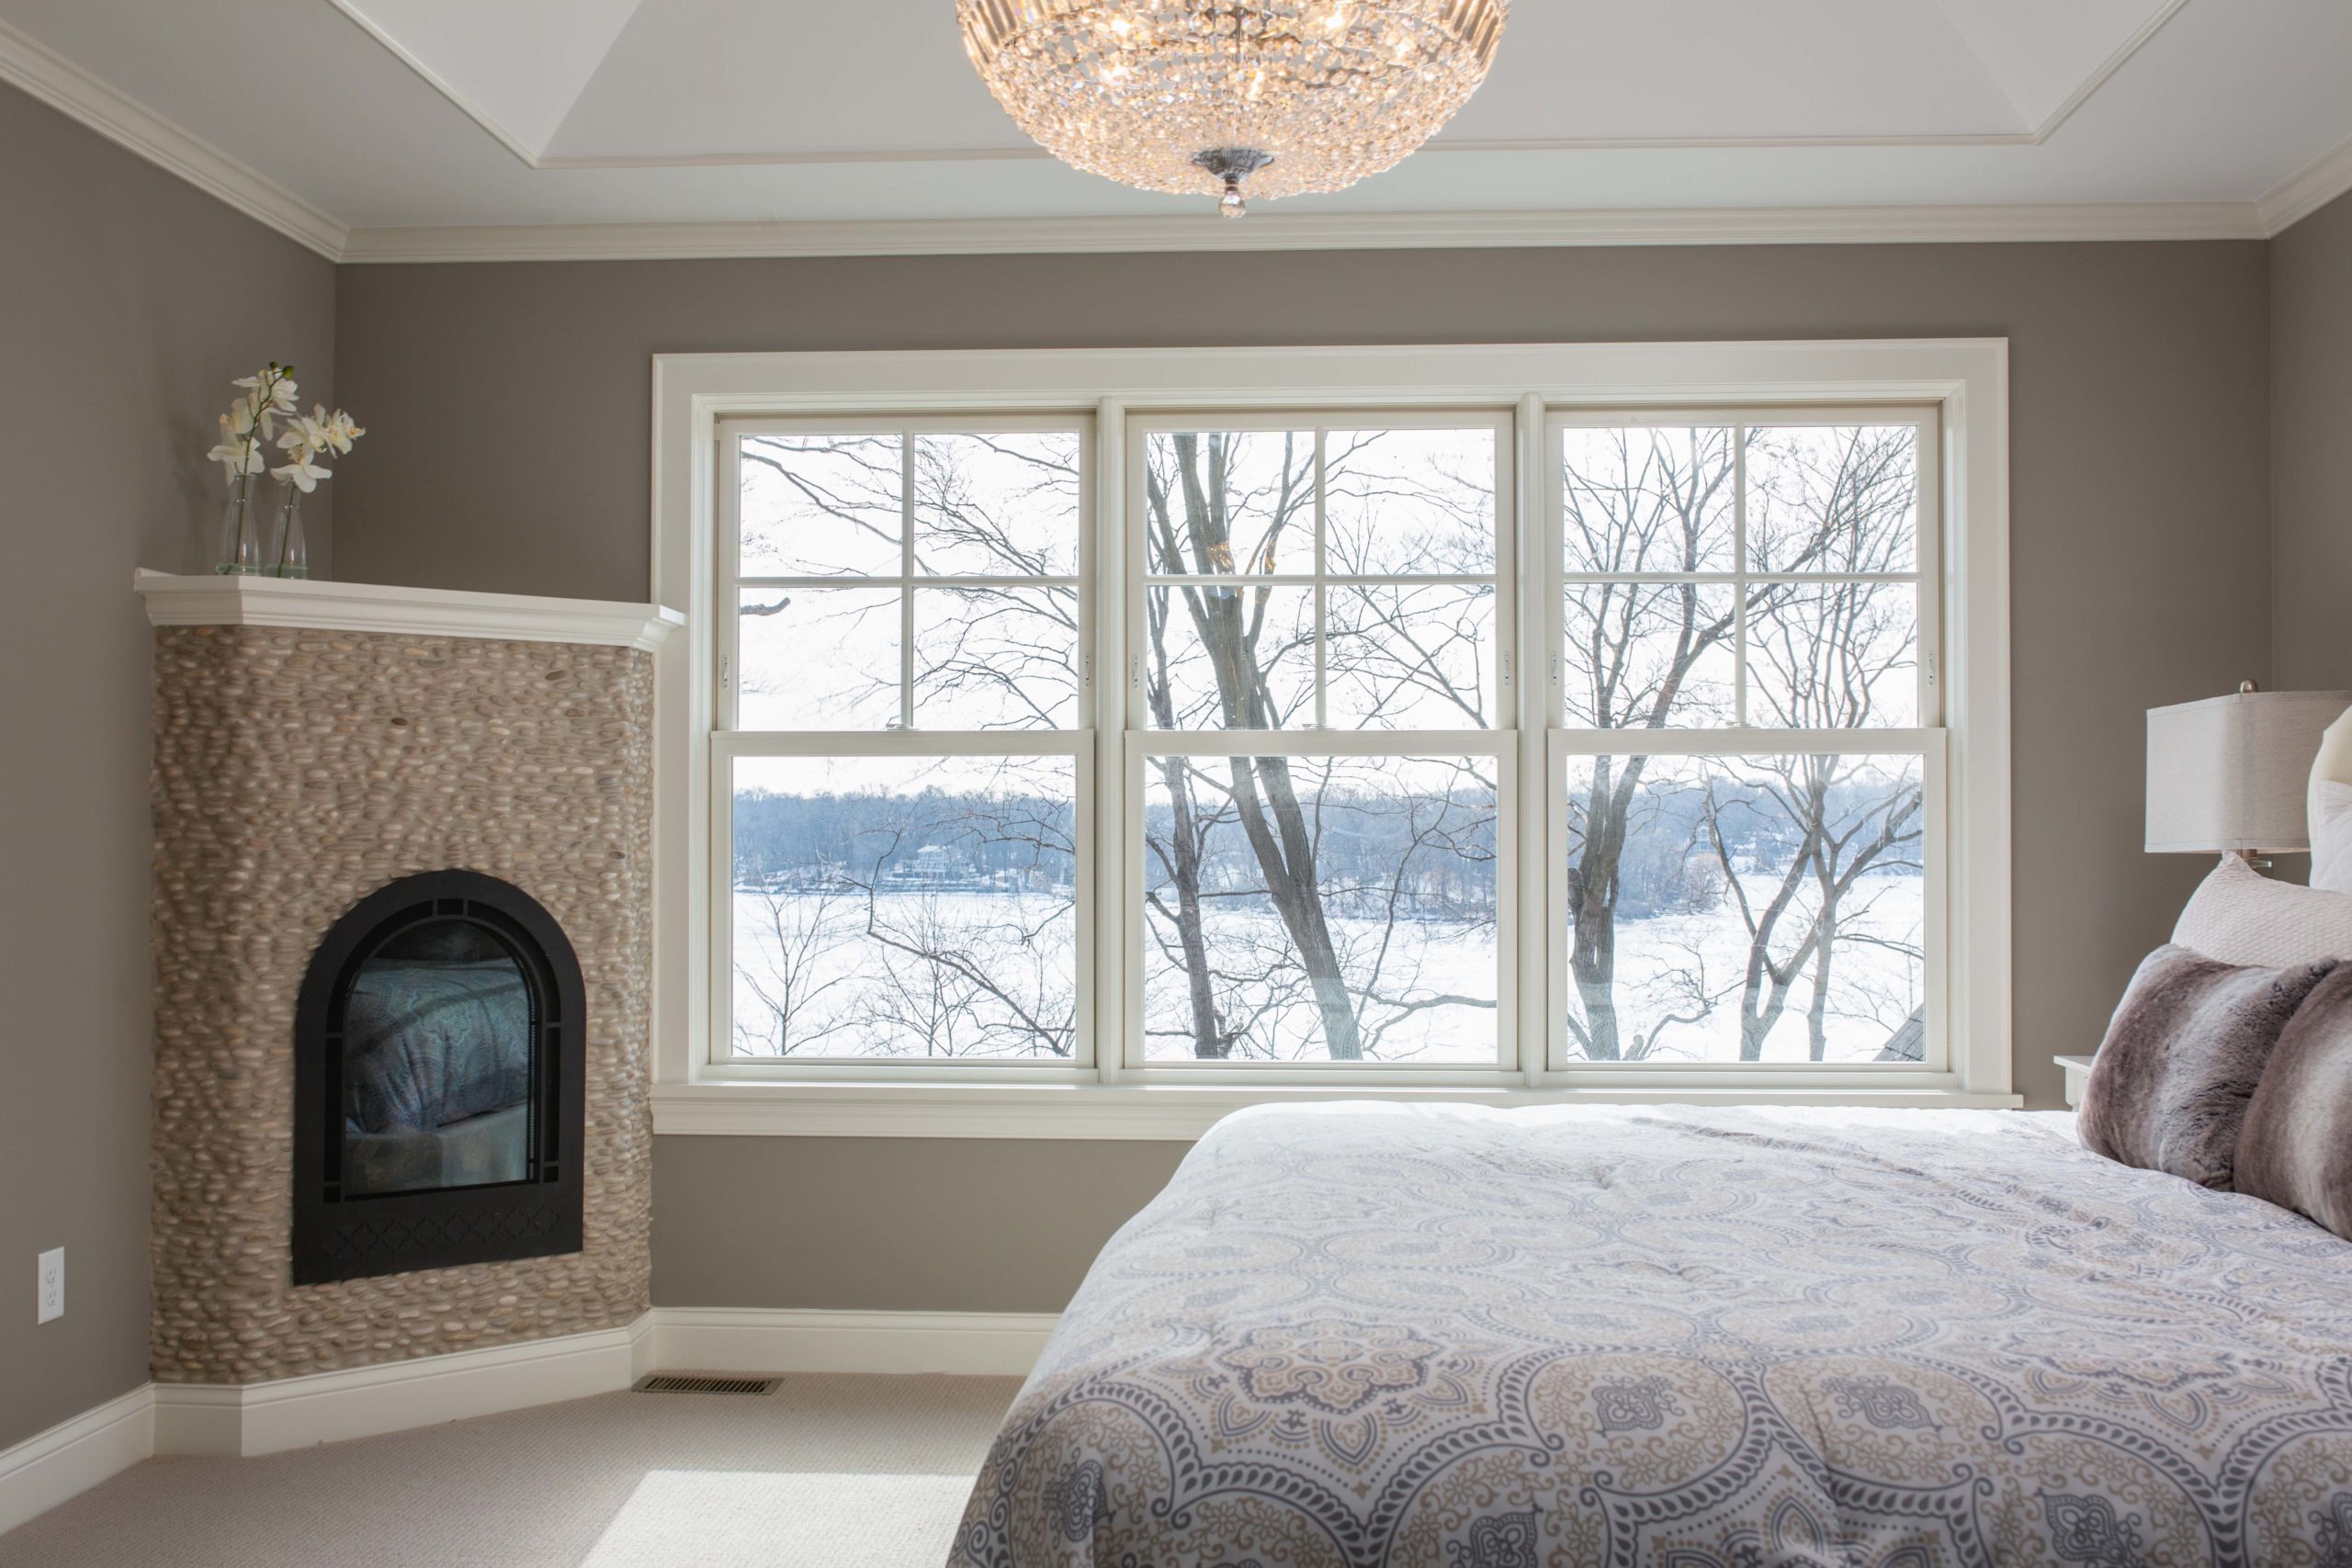 A bedroom with a fireplace and a window.